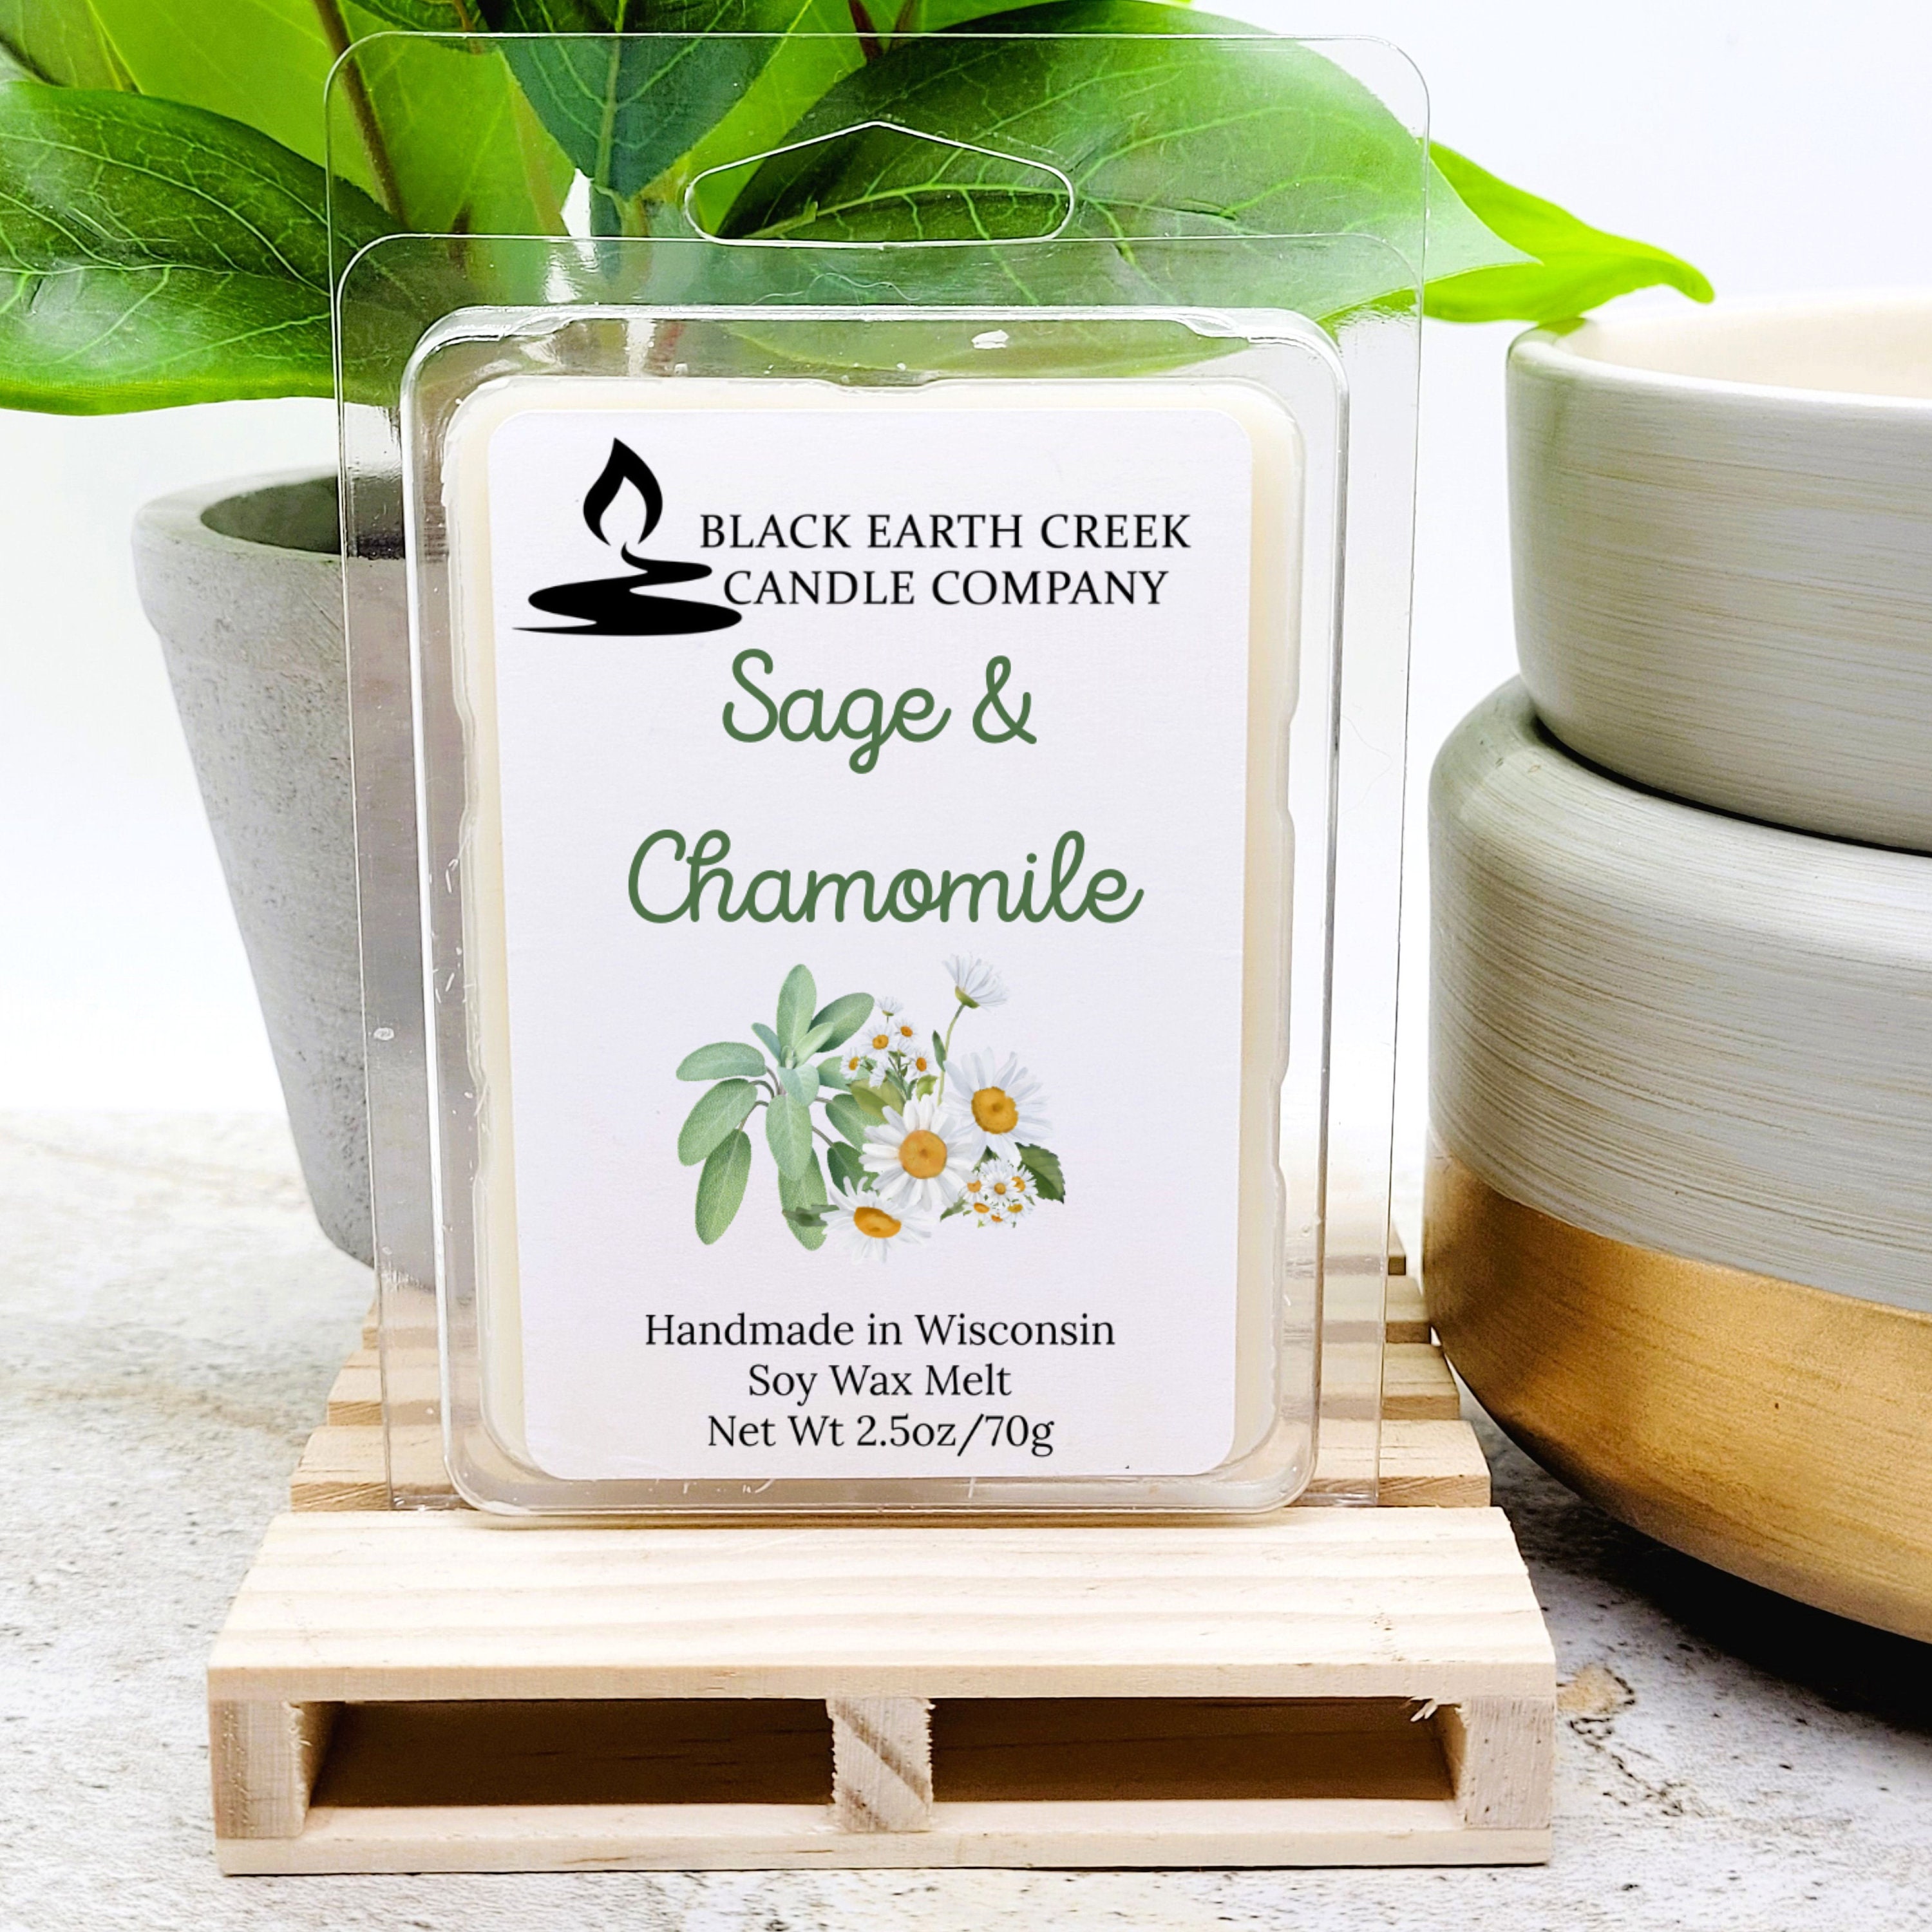 Candle Warmers Etc. Wax Melts 2.5oz - Tranquility (Sandalwood & Lotus)